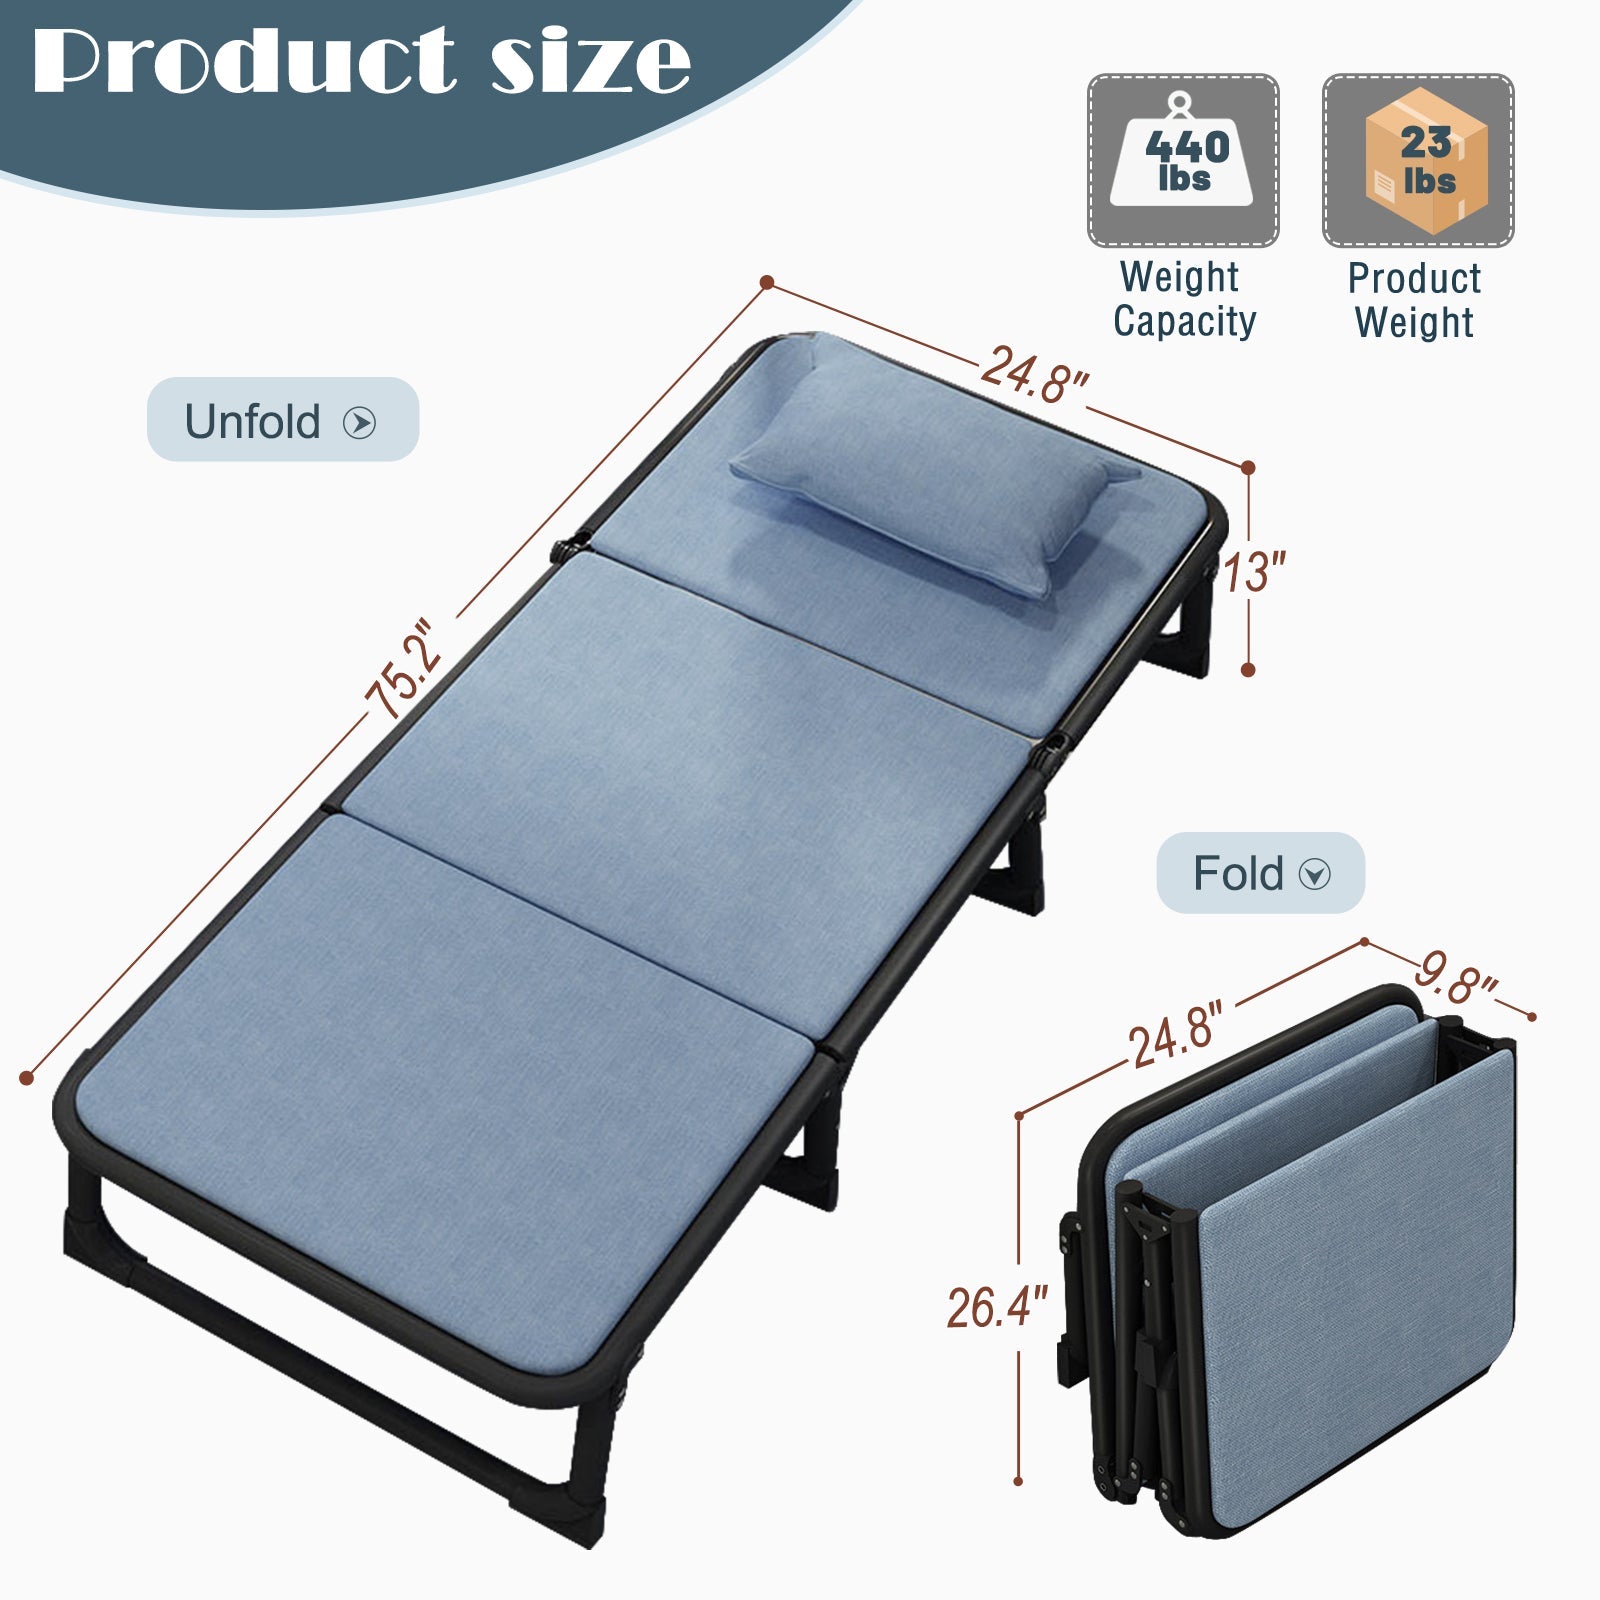 MOPHOTO Folding Bed Cot with Mattress, Portable Beds Frame with Mattress, Portable Fold Up Bed for Outdoor Travel, Foldable Bed with Frame, Sleeping Bed Cot for Adults, Blue